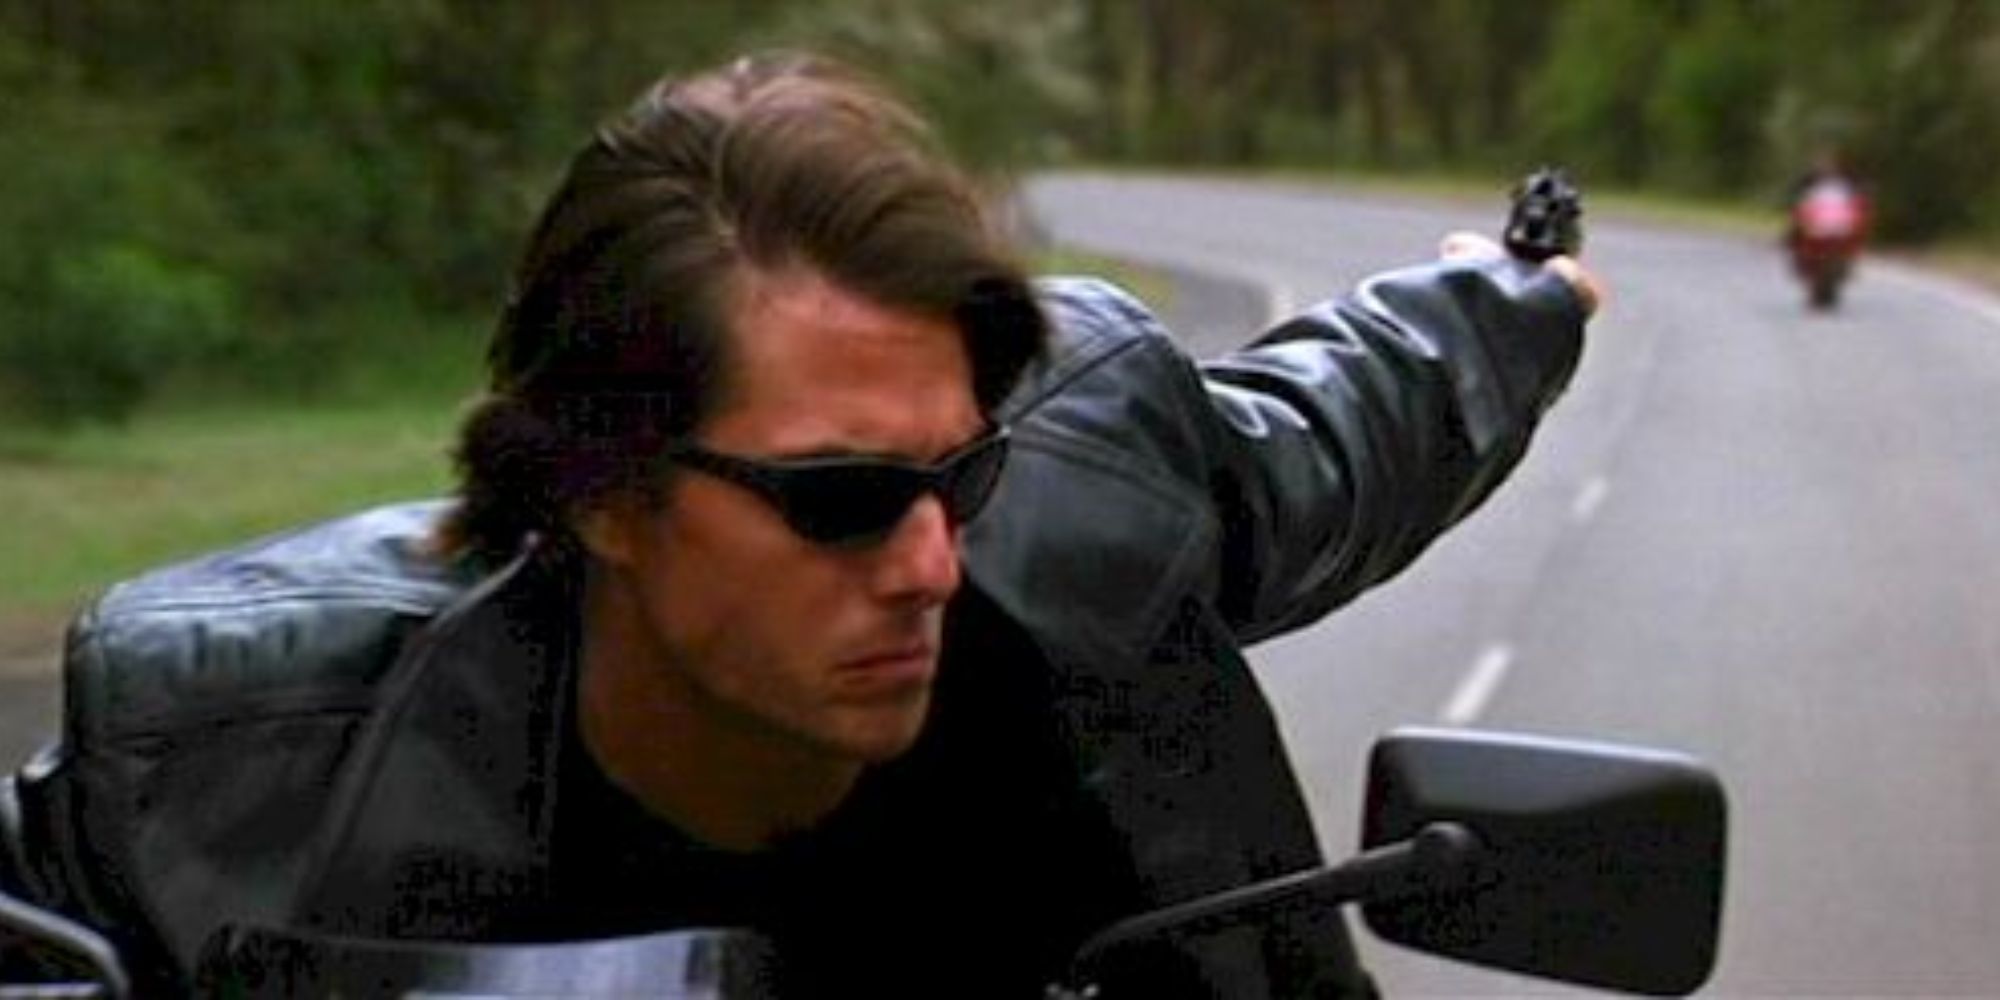 Ethan Hunt shoots at his pursuer during a motorcycle chase